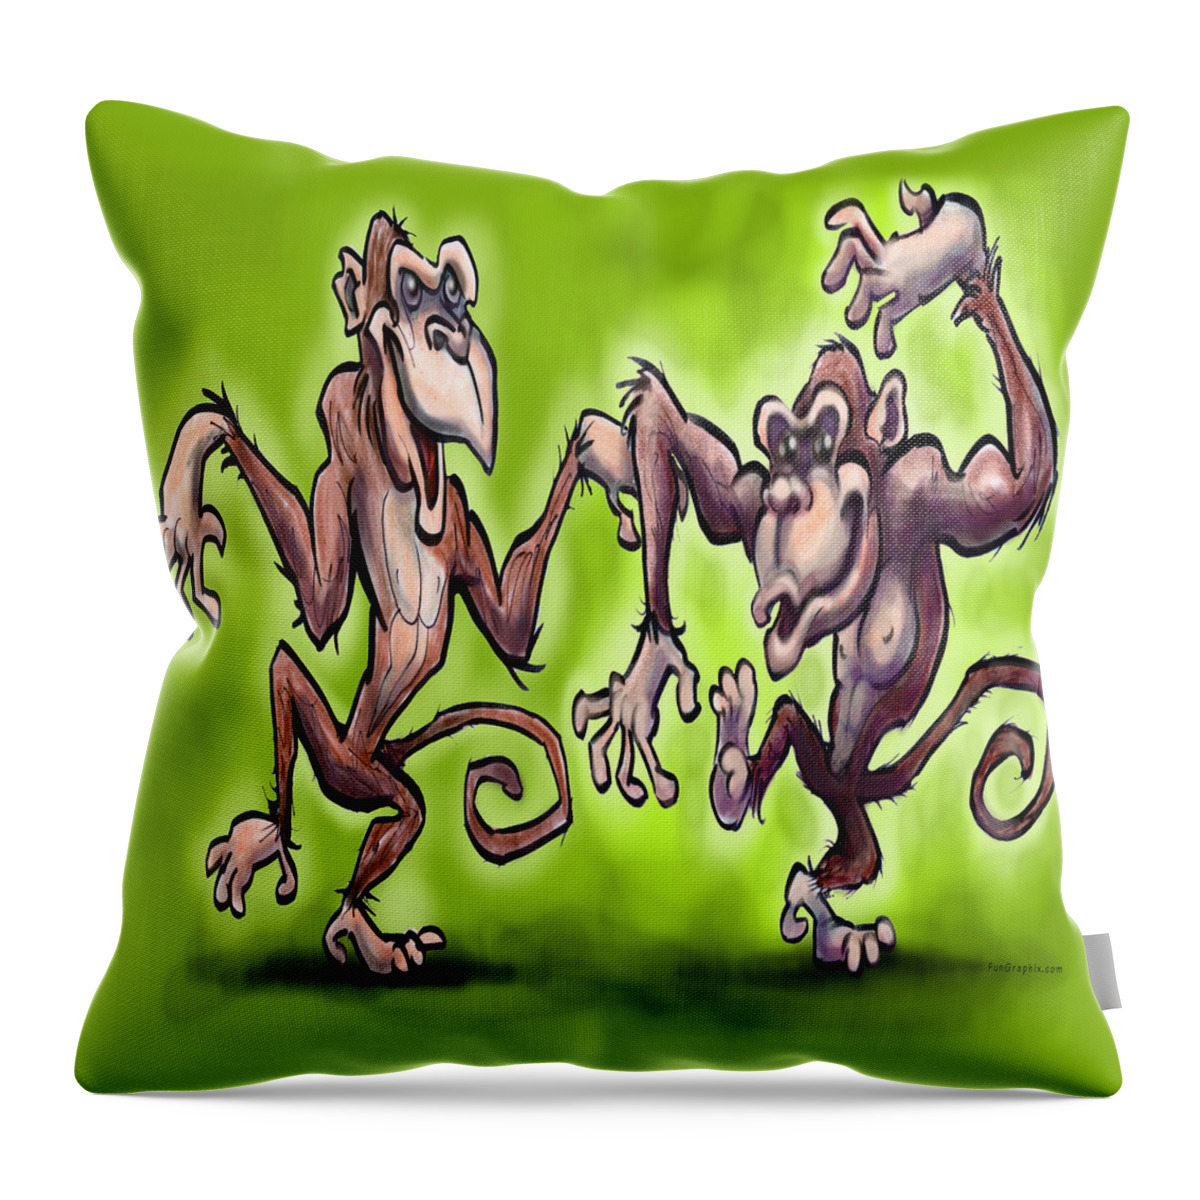 Monkey Throw Pillow featuring the painting Monkey Dance by Kevin Middleton